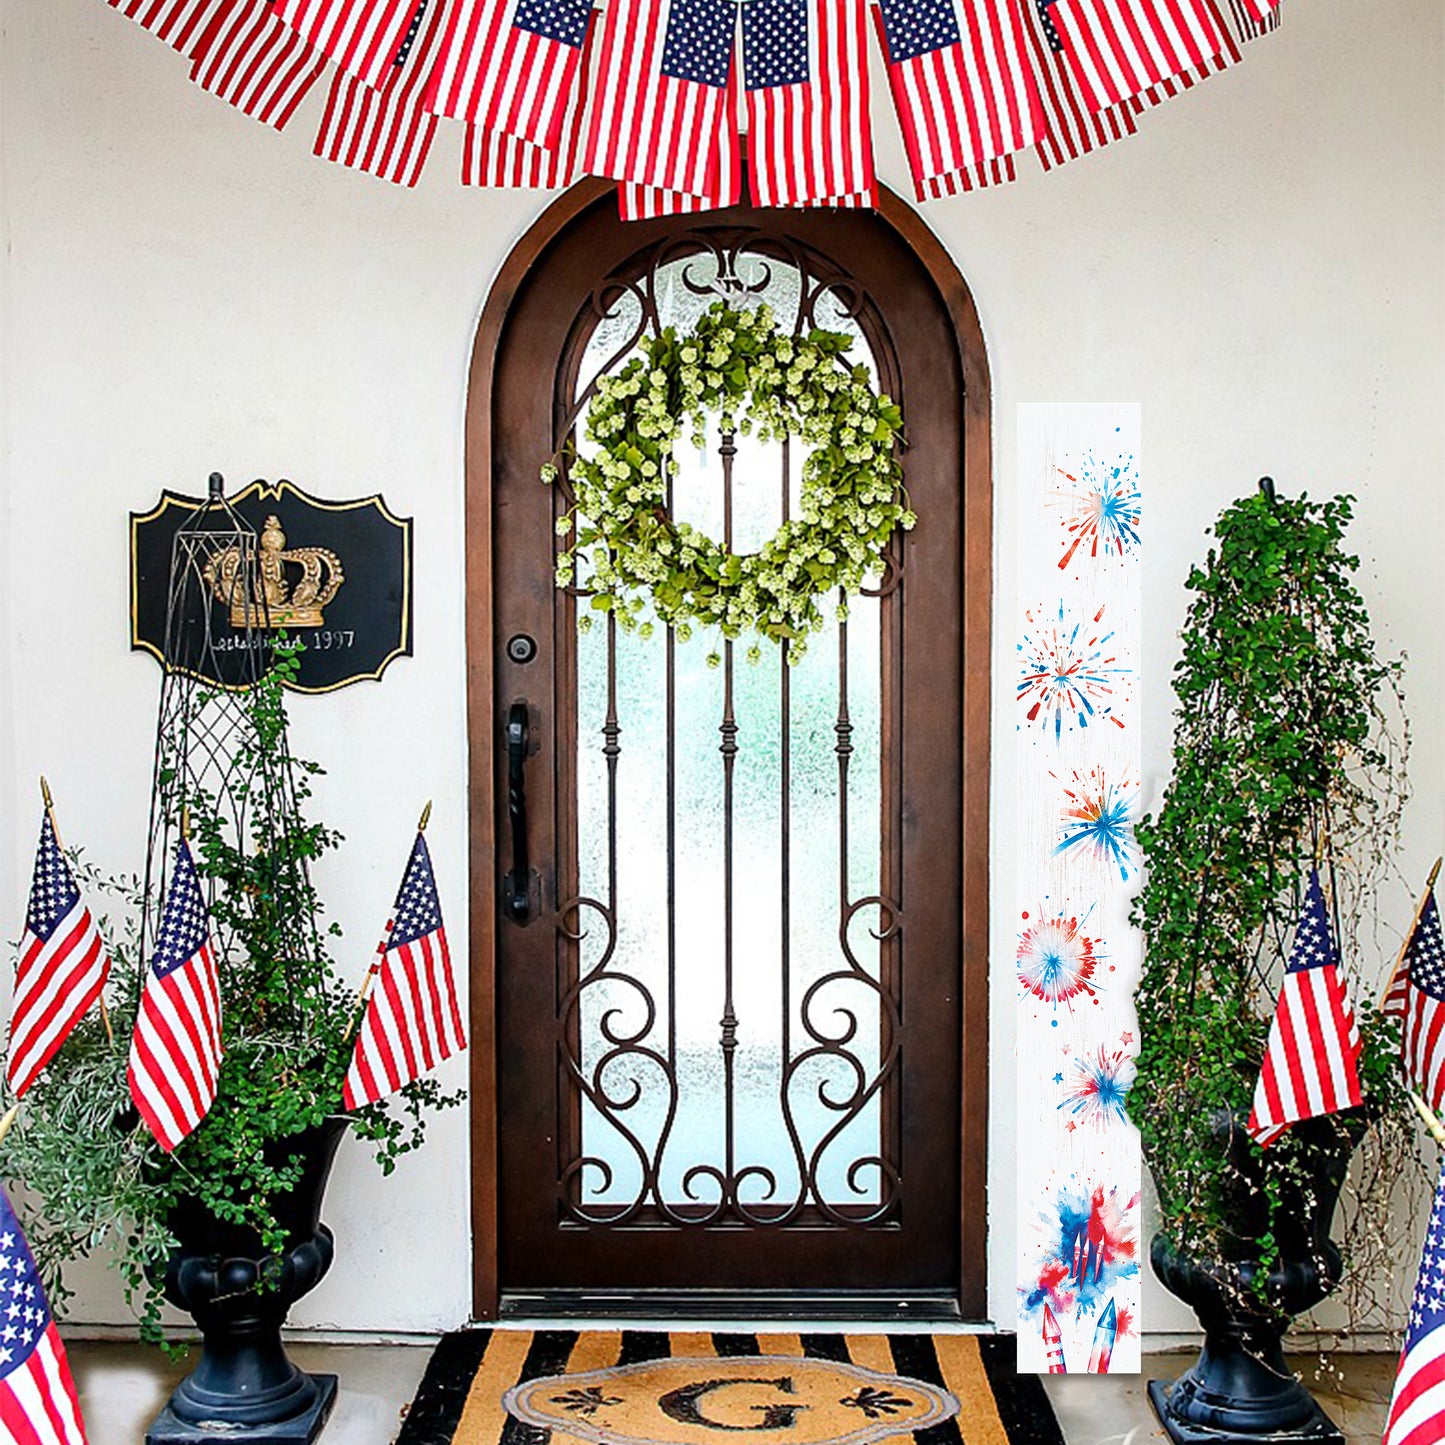 72in Firework Pattern Porch Sign | Patriotic Wooden Porch Decor | 4th of July Decor for Front Door | Independence Day Outdoor Decor